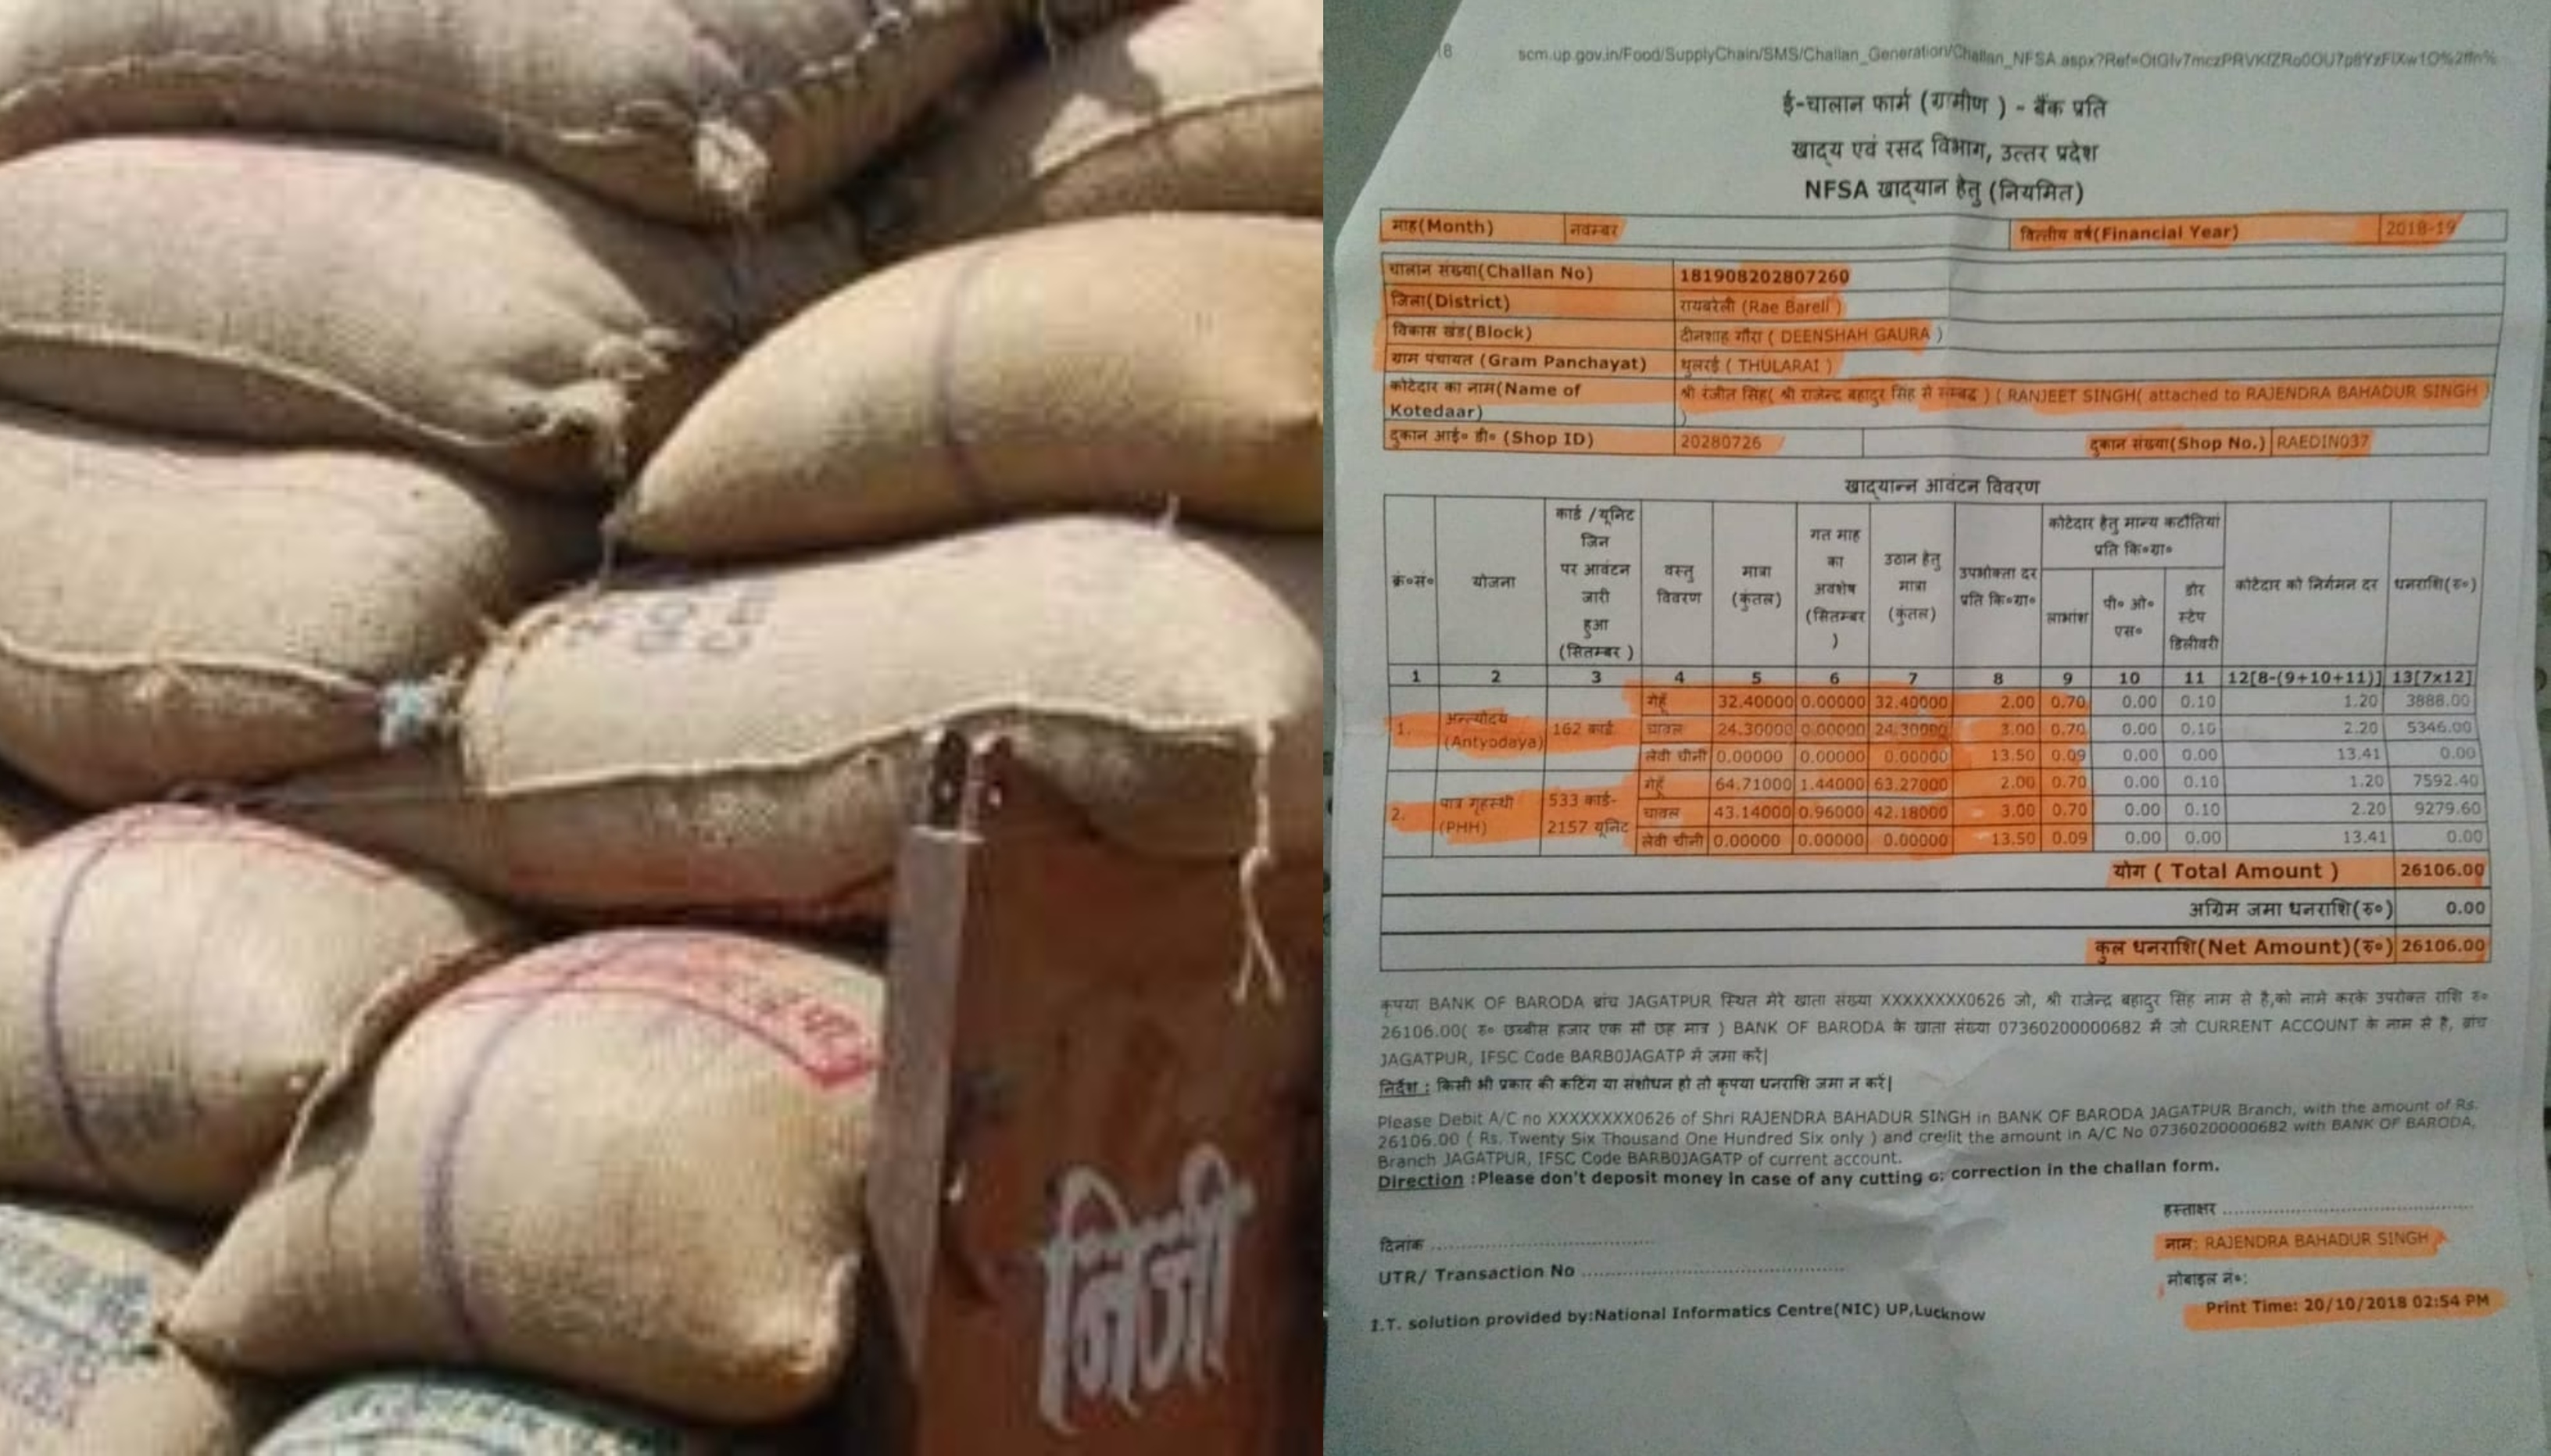 Dalmau supply Inspector Harendra Singh accused of ration scam